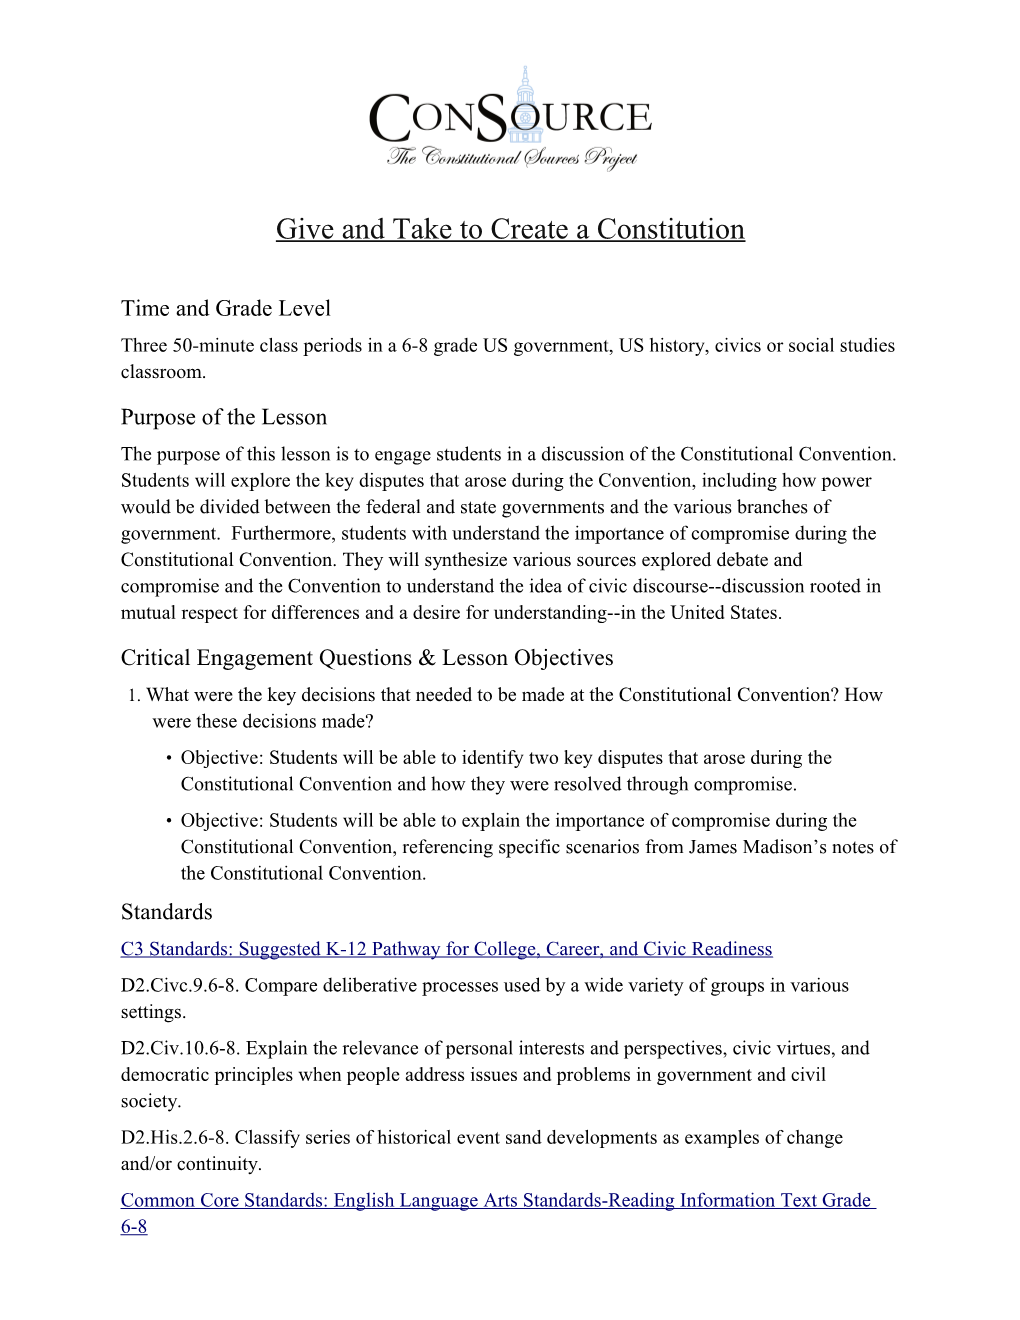 Give and Take to Create a Constitution